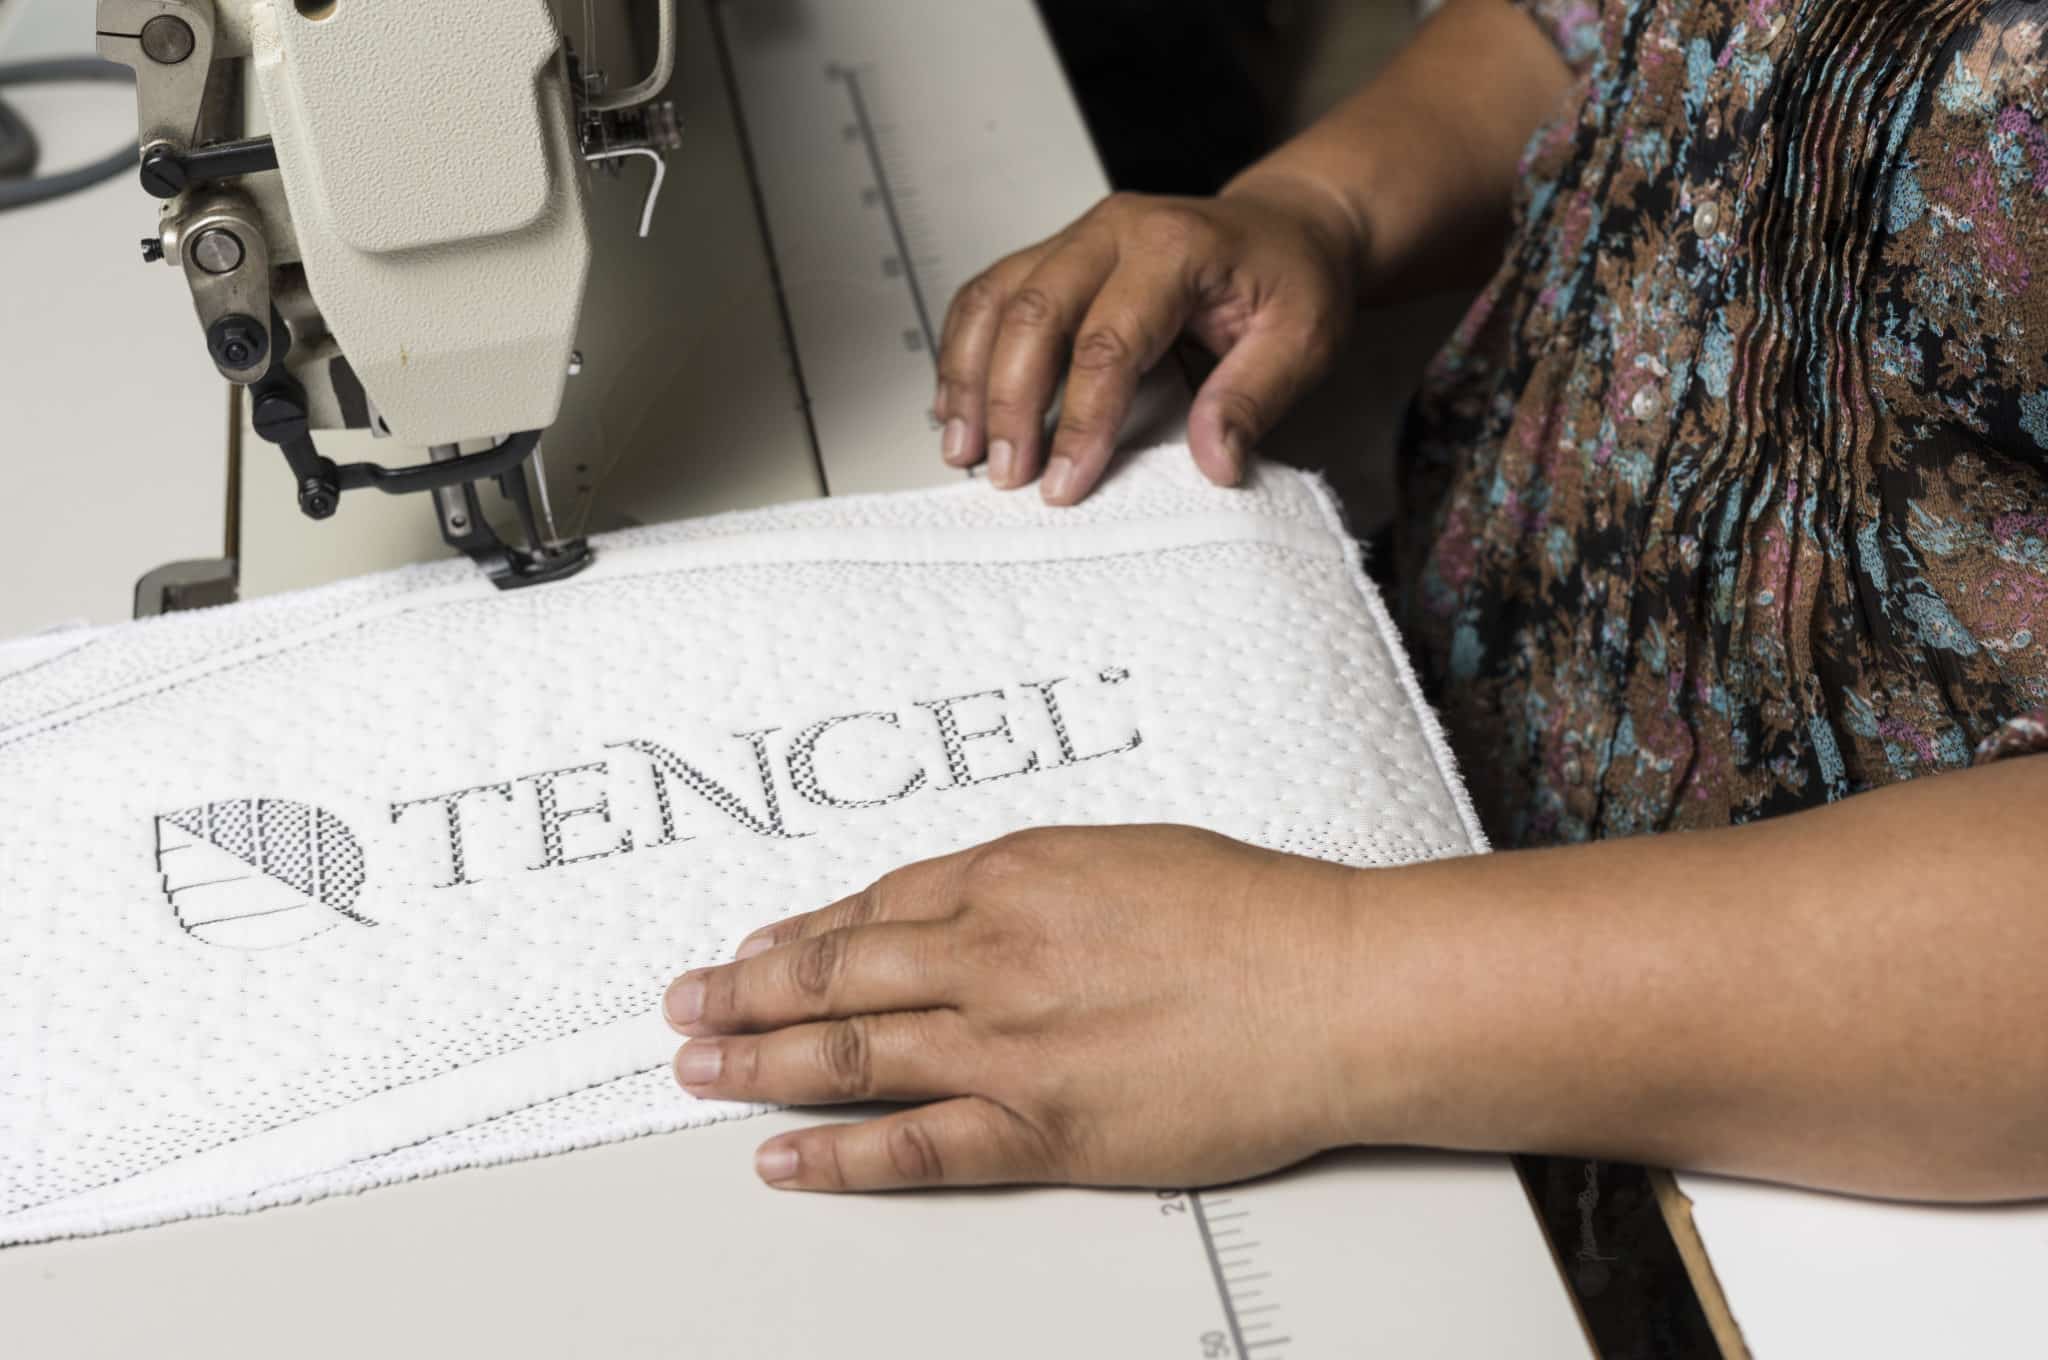 A woman sewing a Tencel mattress cover using a sewing machine